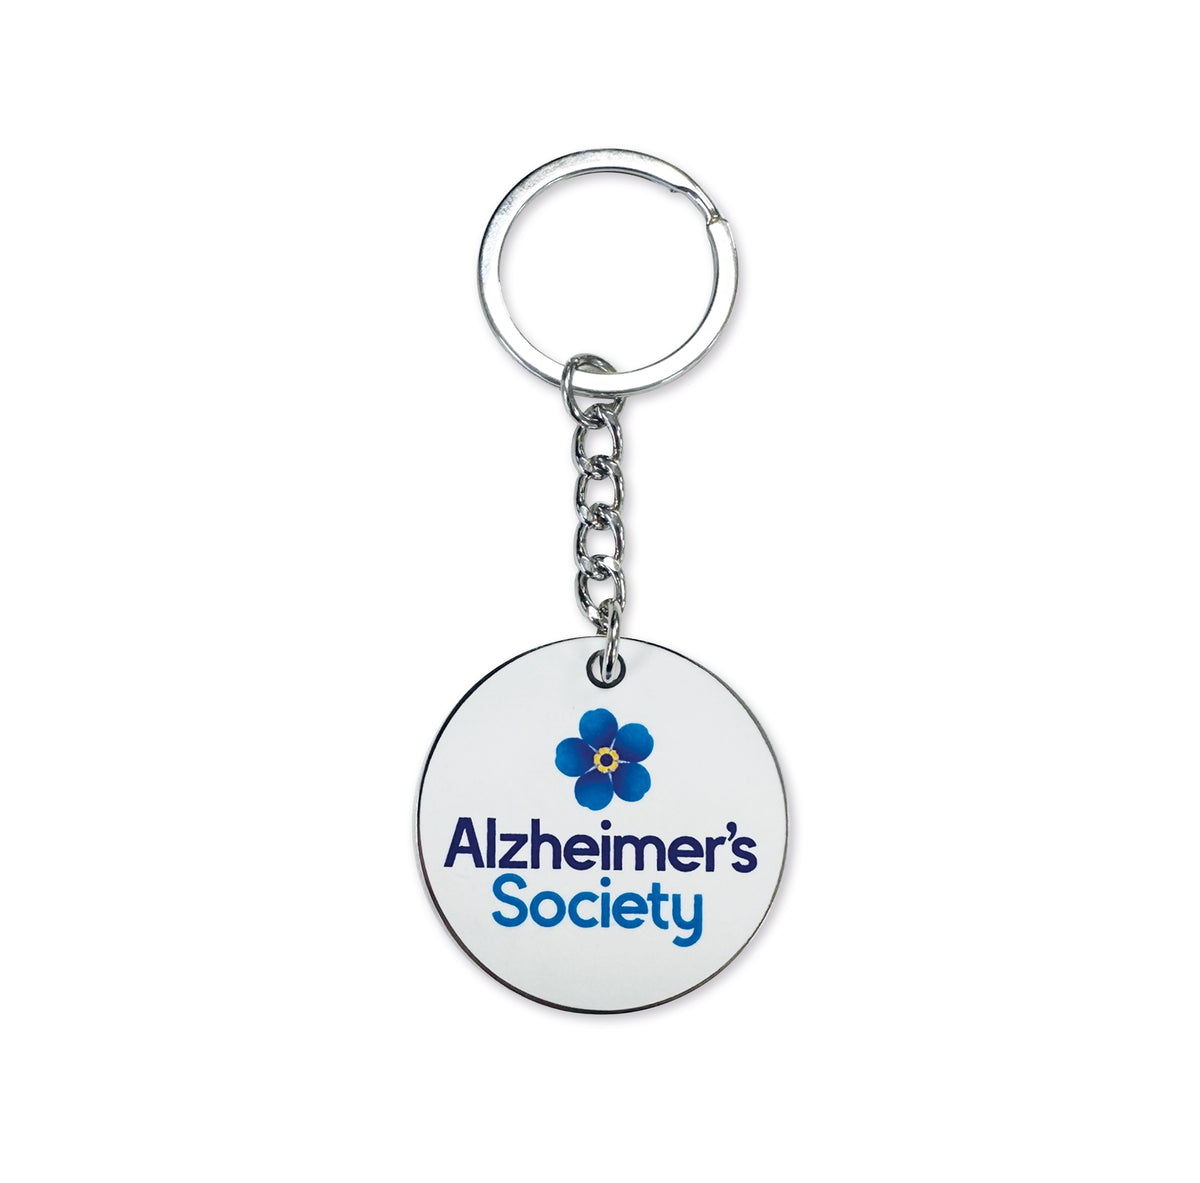 Forget-me-not flower key ring